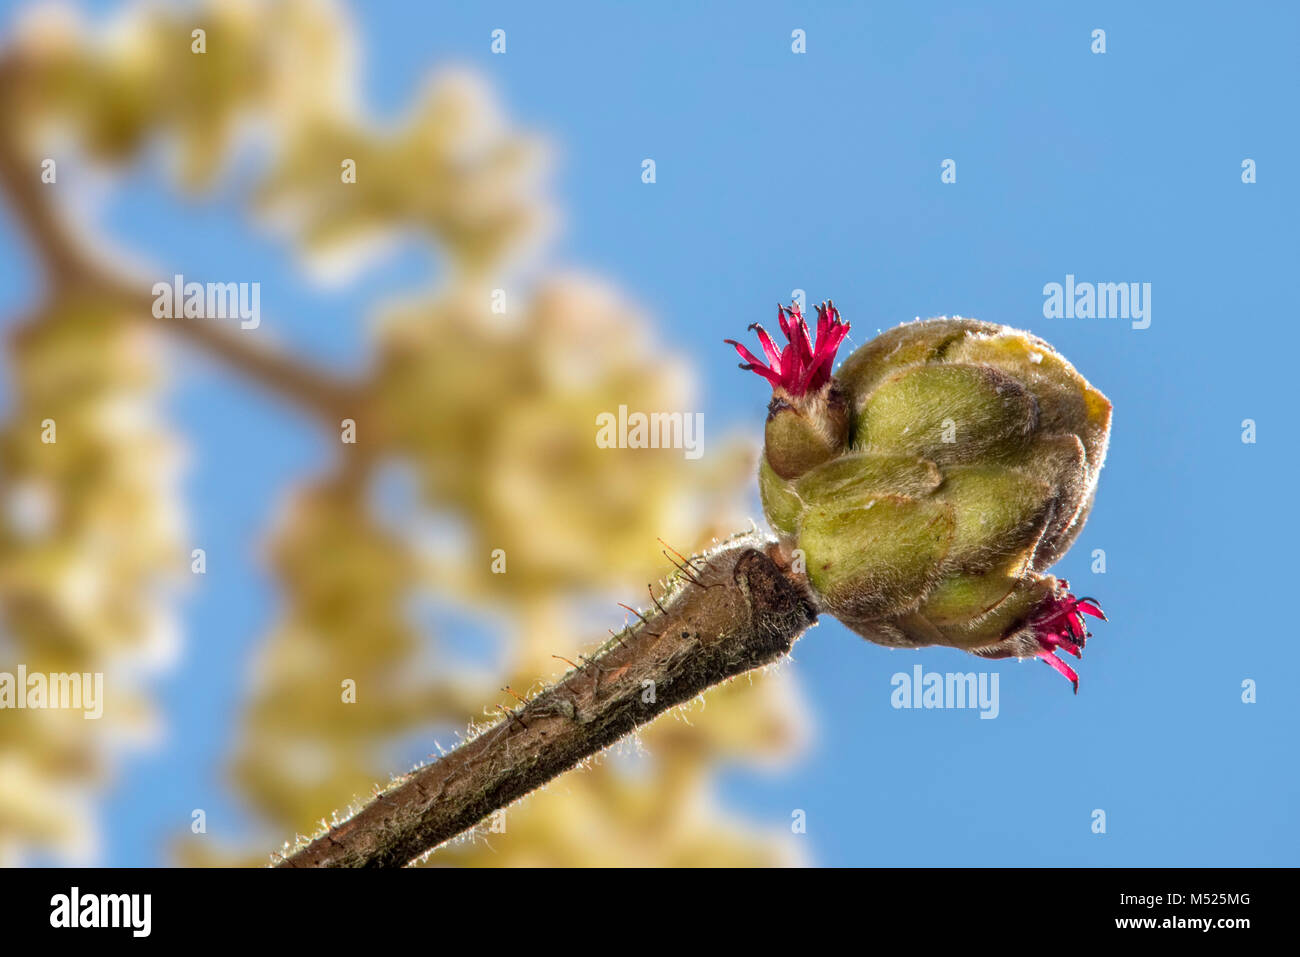 Common hazel (Corylus avellana) close up of female catkin concealed in bud with only the red  styles visible against blue sky Stock Photo